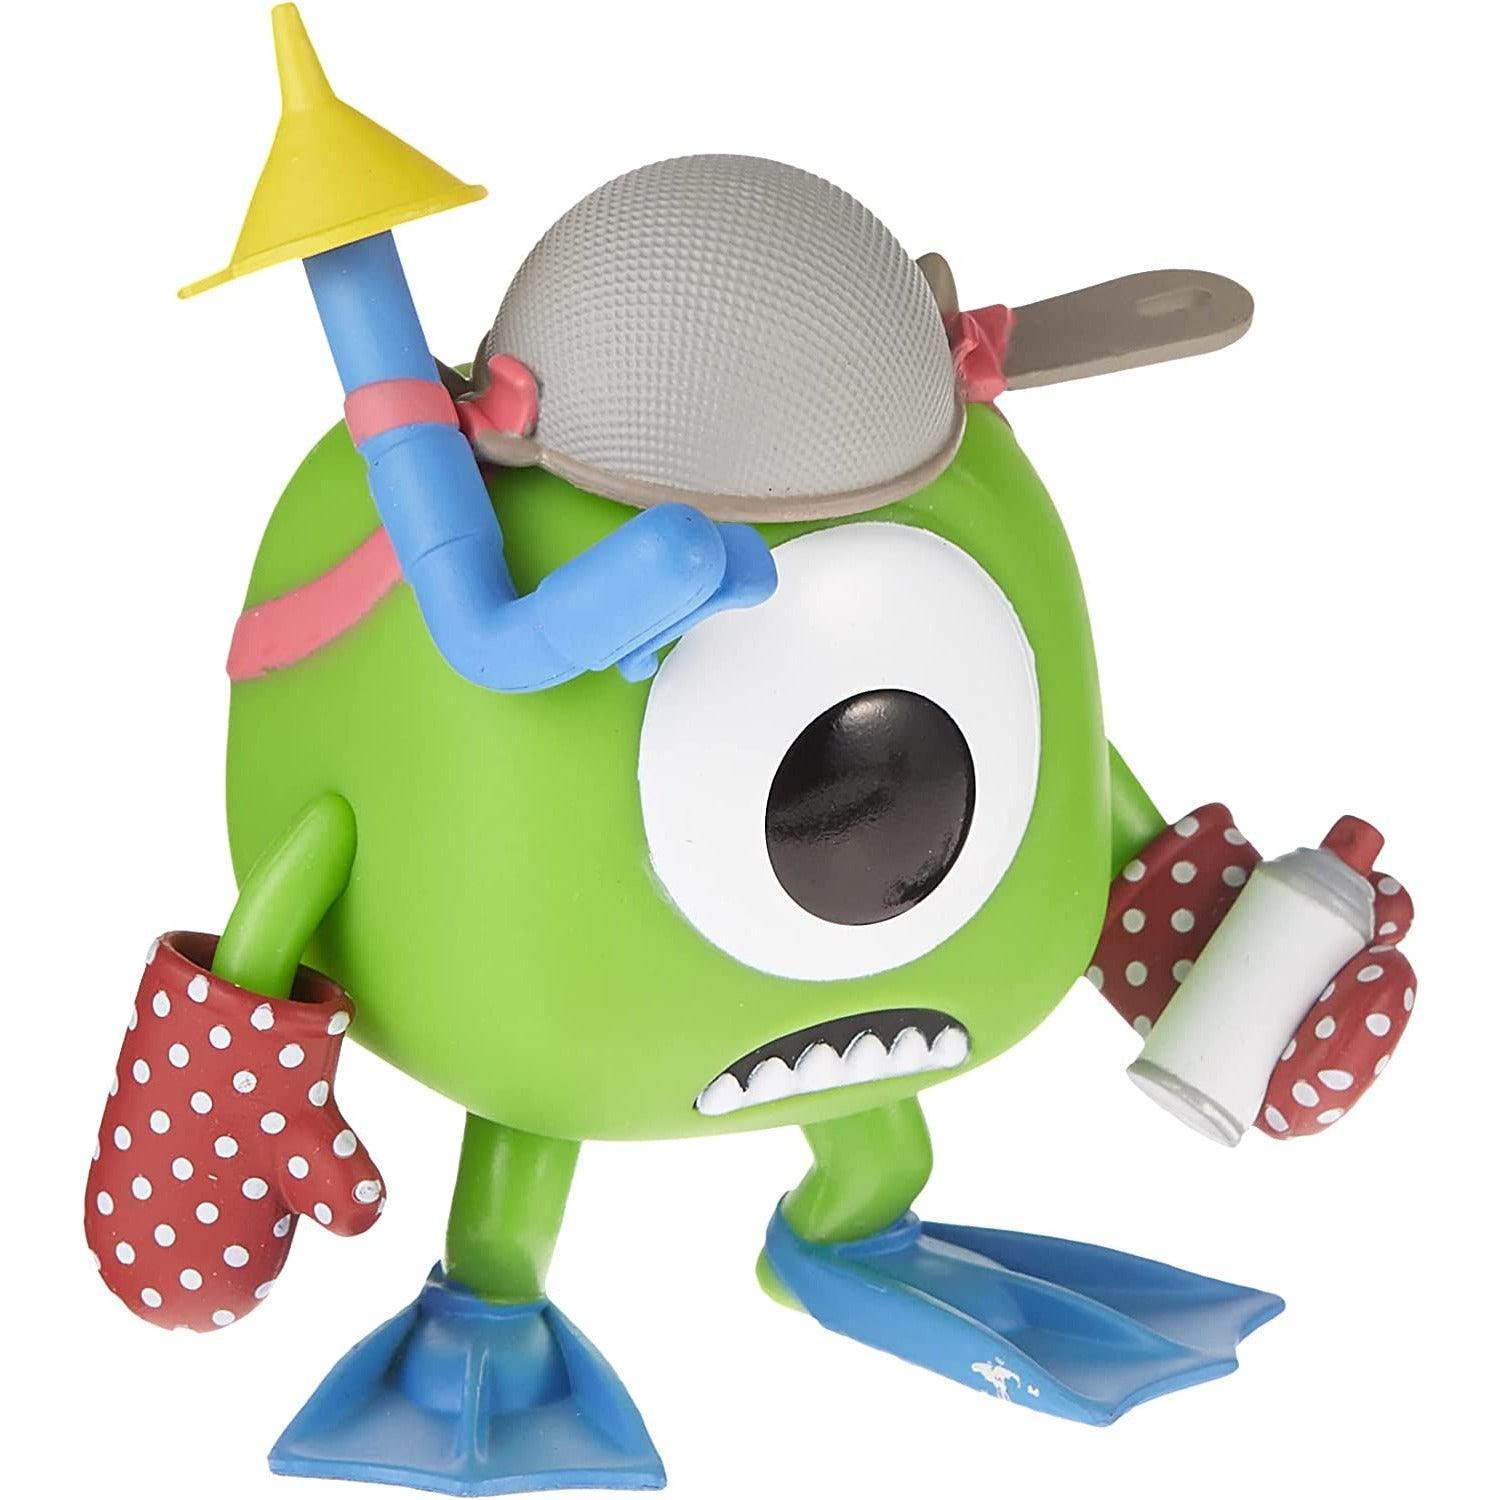 Funko Pop! Disney Monsters Inc - Mike With Mitts - BumbleToys - 18+, Boys, Fashion Dolls & Accessories, Funko, Girls, Pre-Order